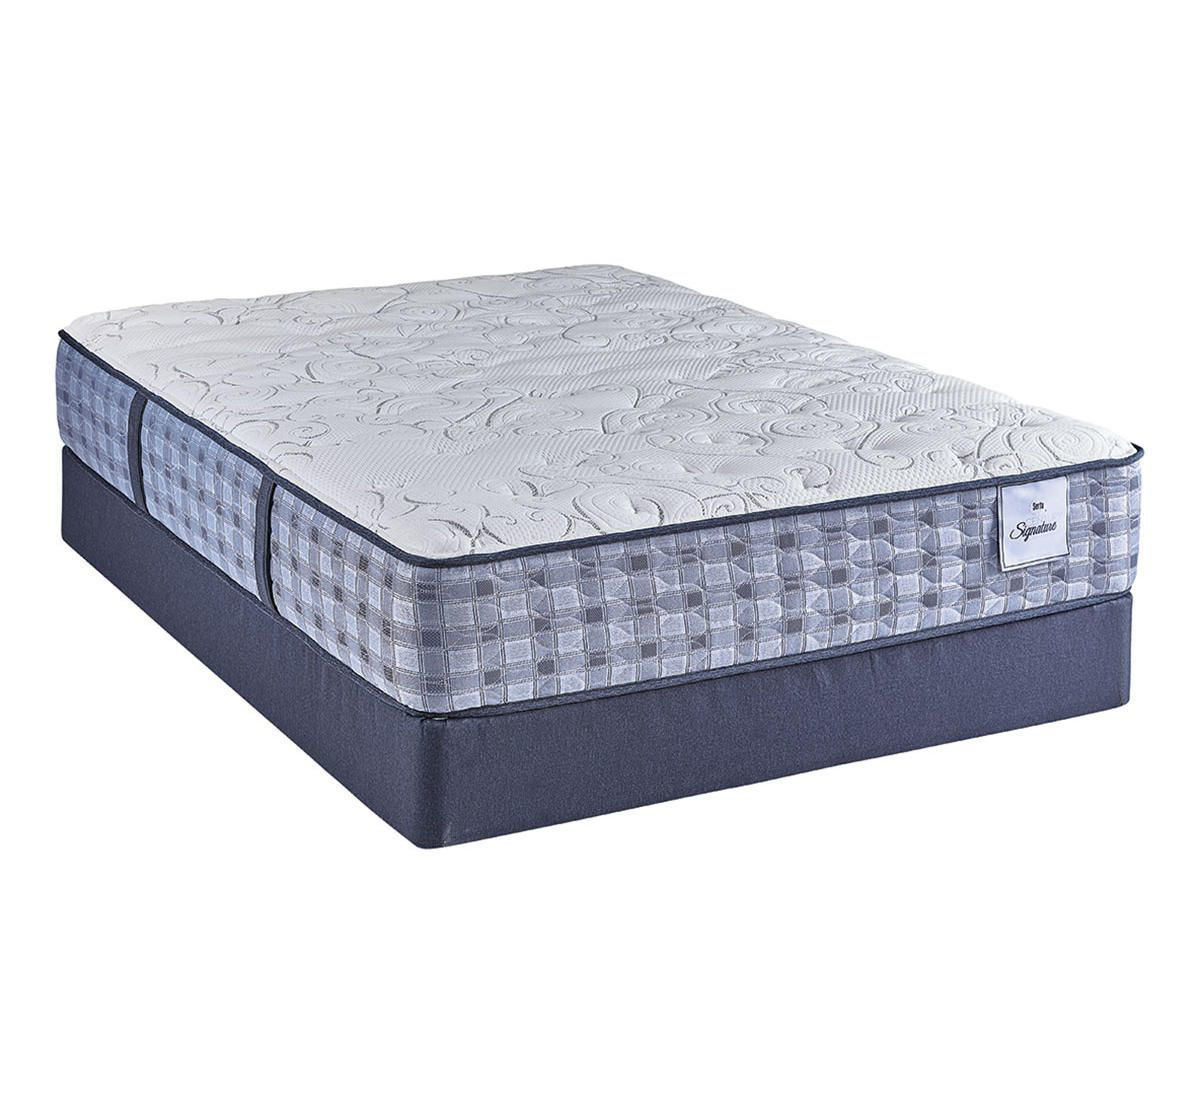 Havenwood Firm Twin Xl Mattress Set Badcock Home Furniture More,Meatloaf Recipes